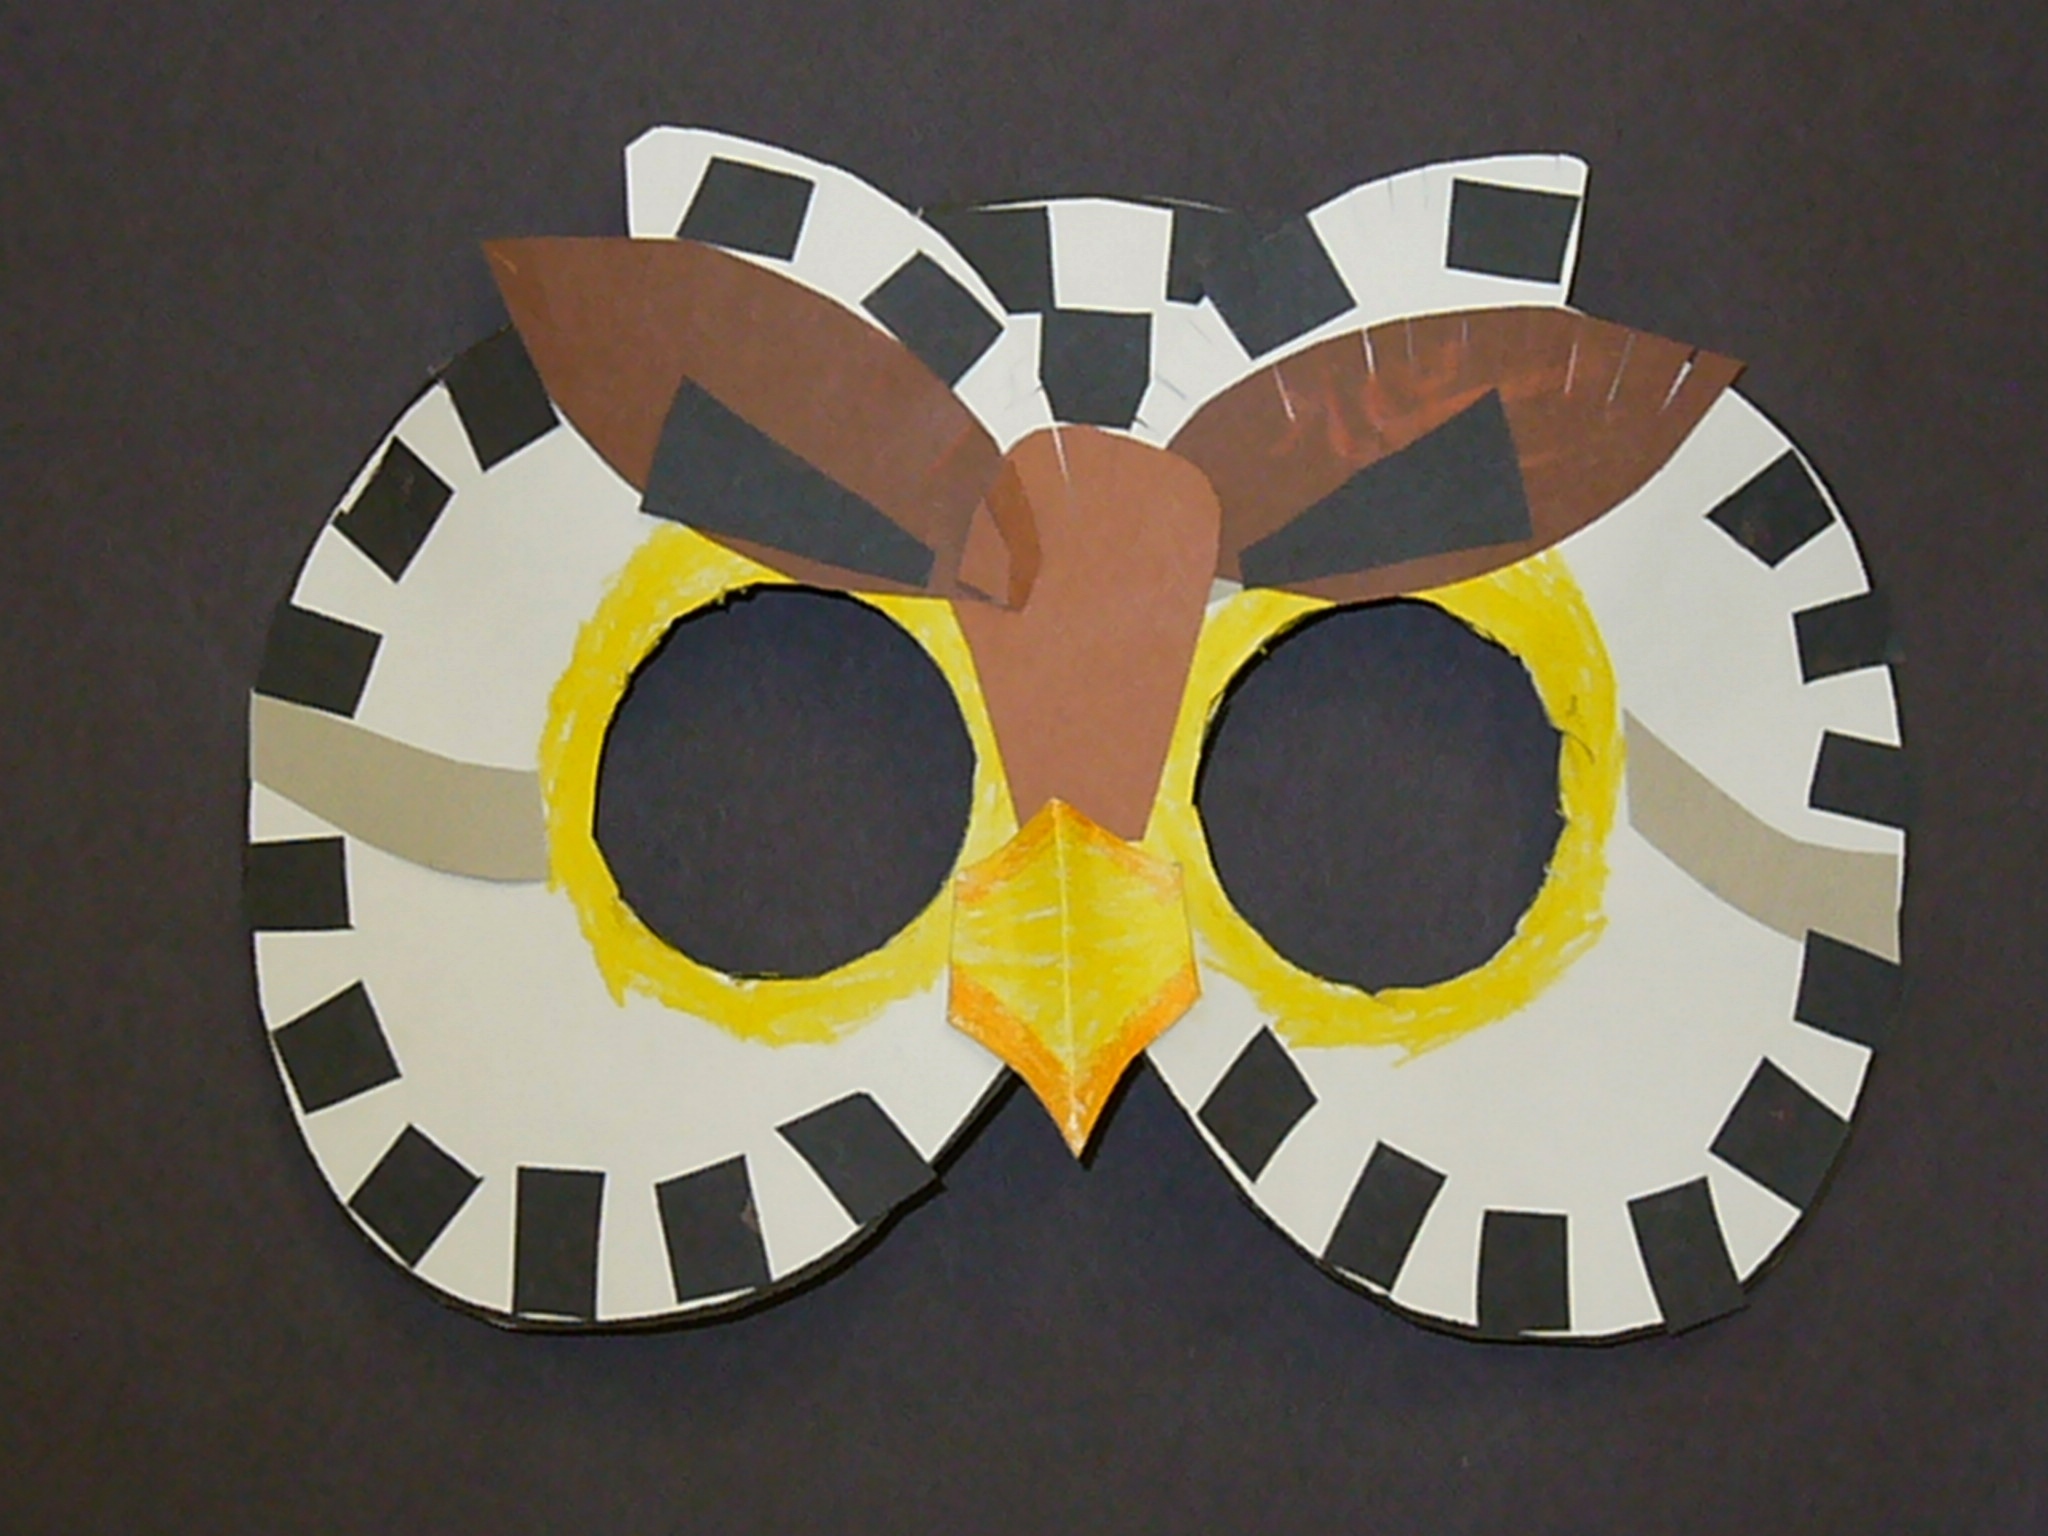 1637009068-caiden_bogle__grade_4__campbell__cut_paper_and_crayon_mask